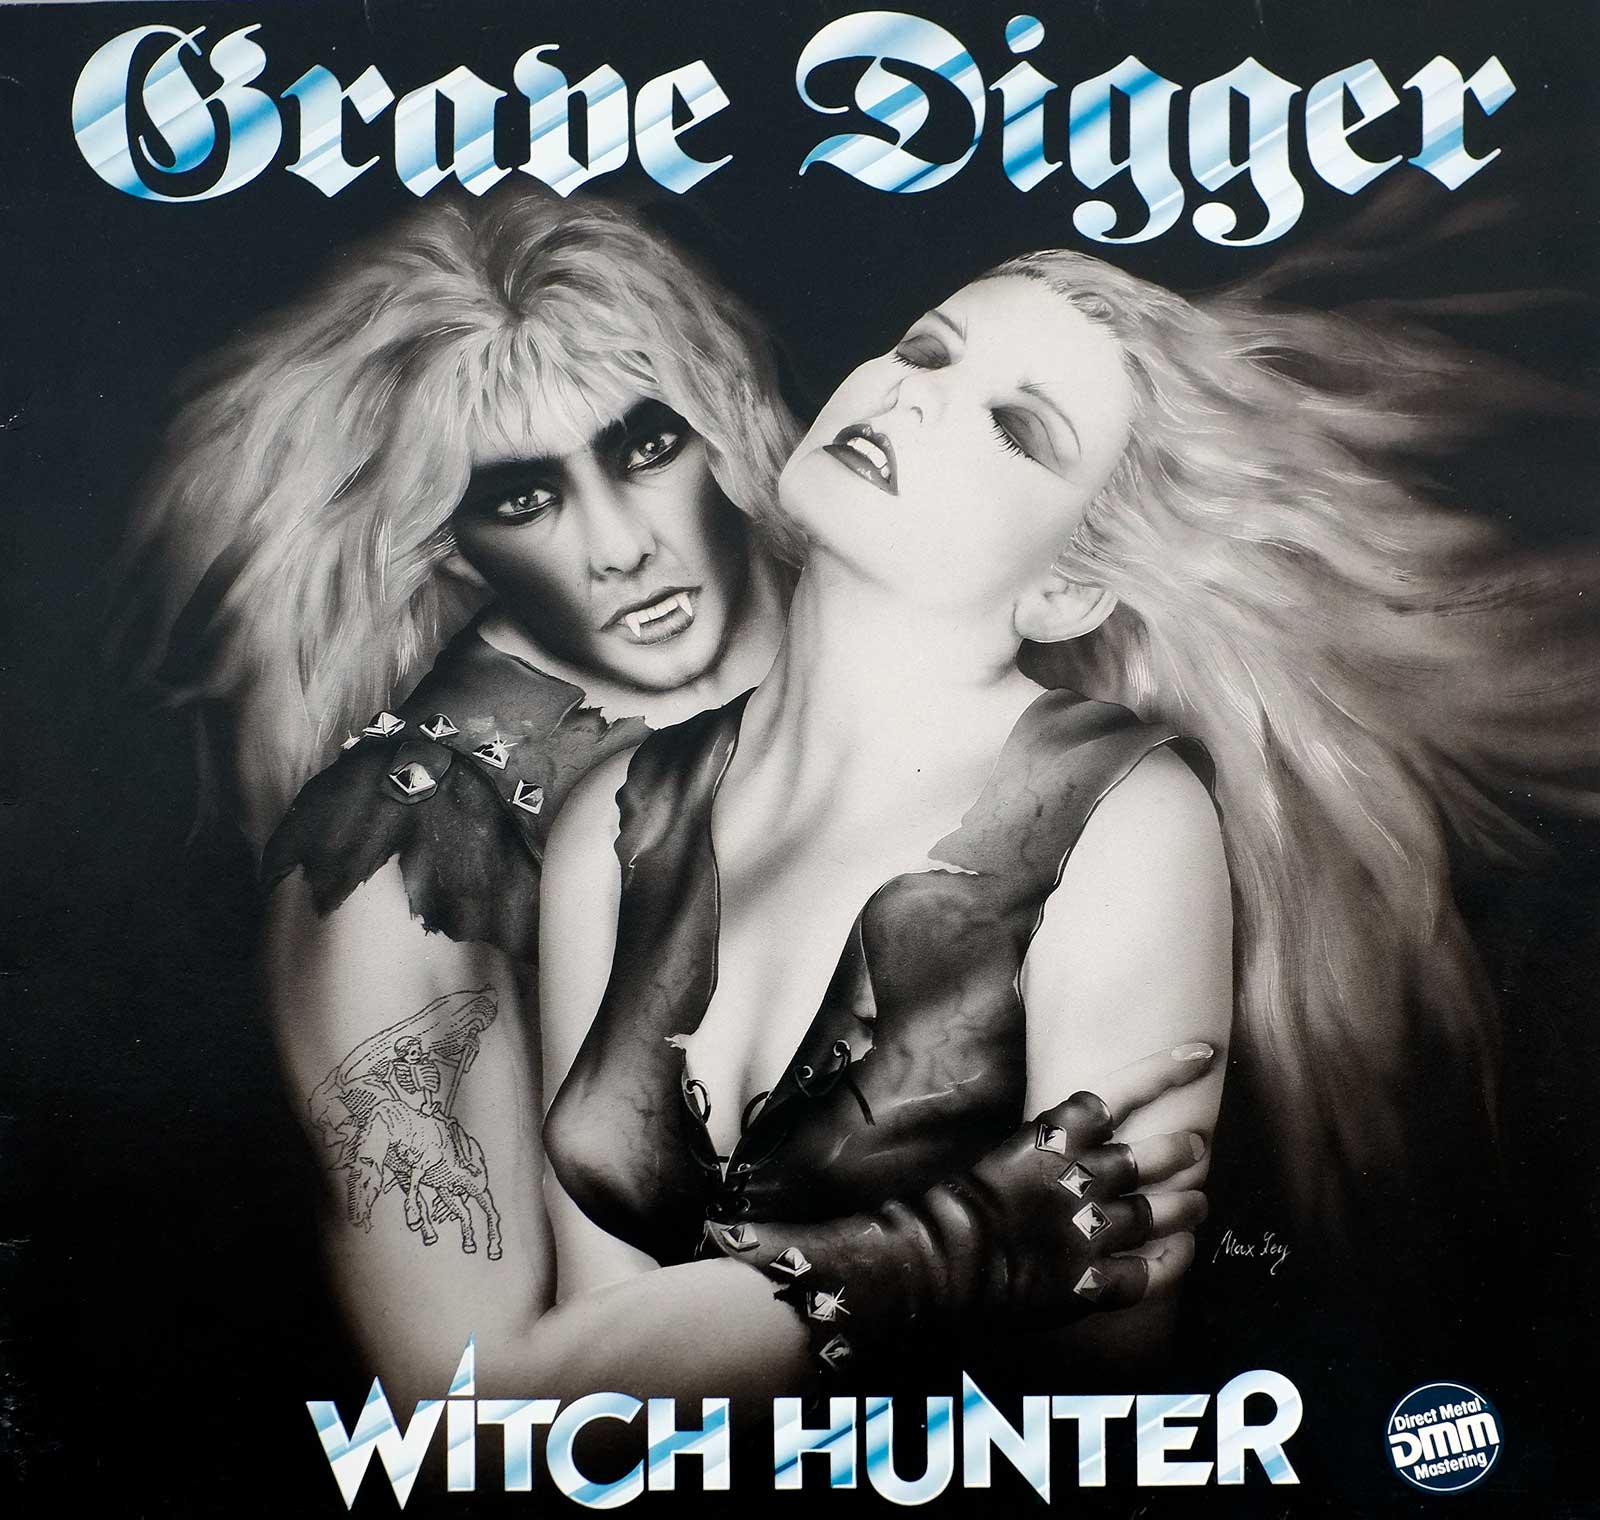 large album front cover photo of: Witch Hunter by Grave Digger 